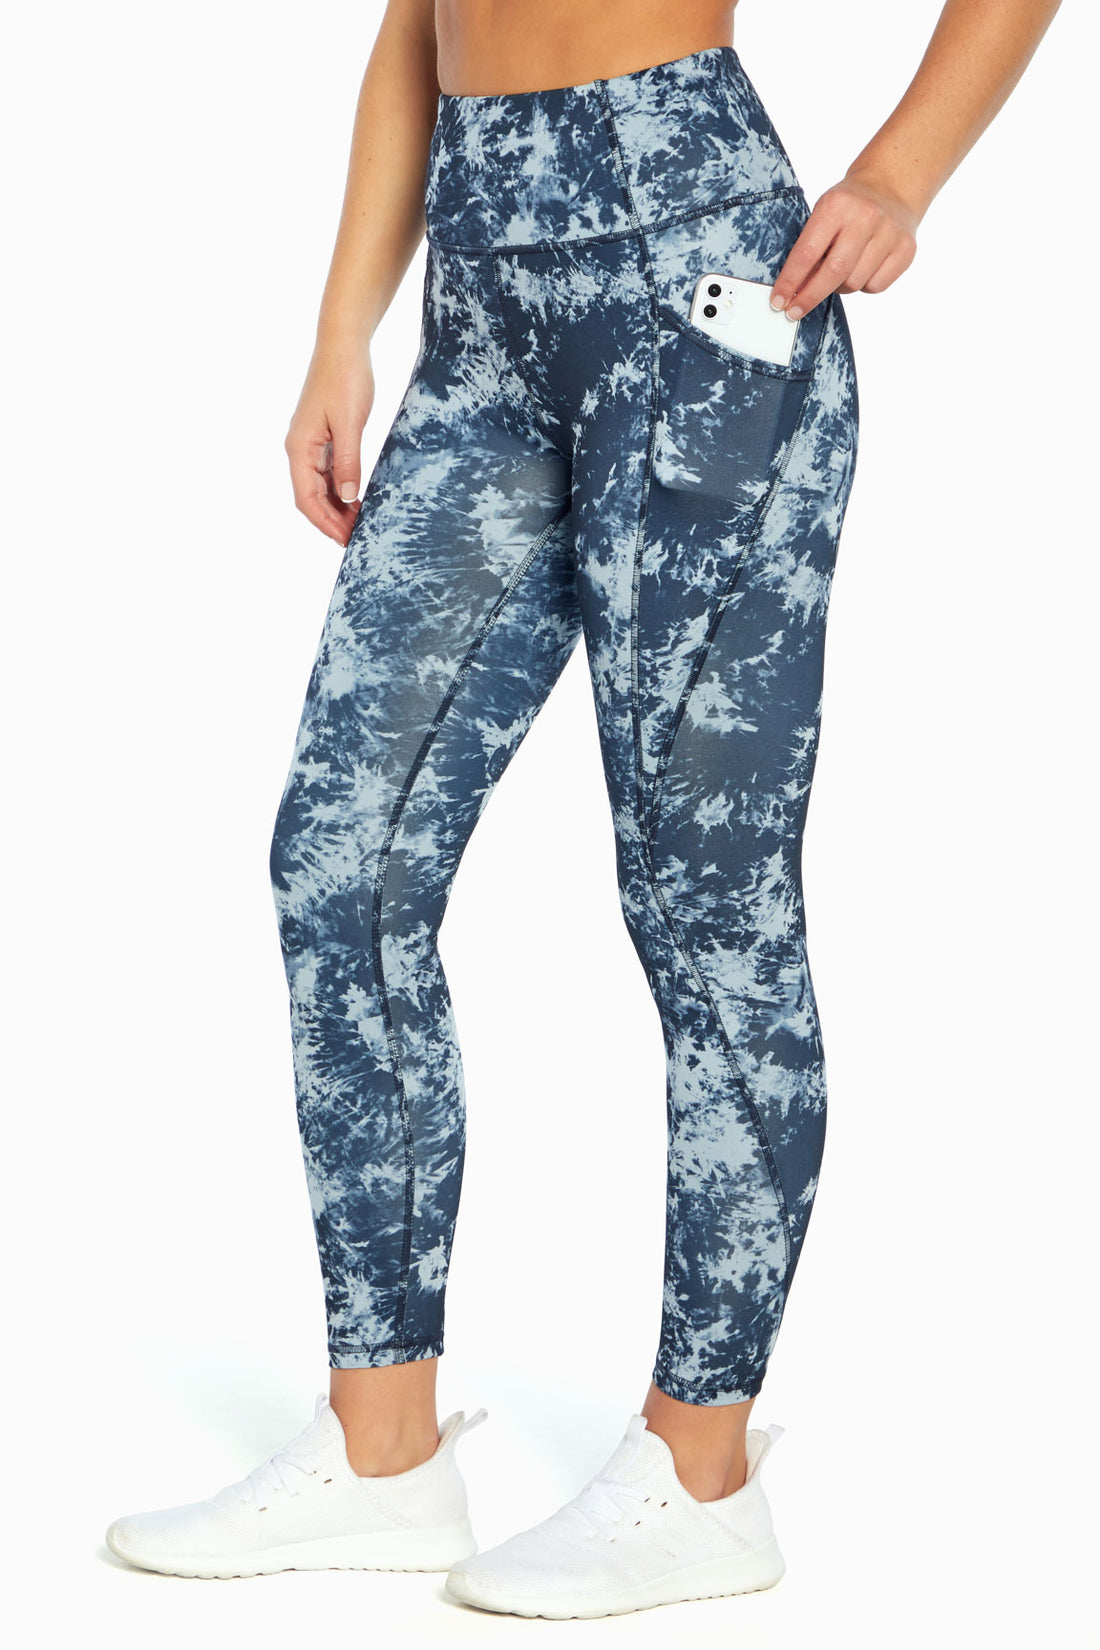 Marika Fitness - Embossed floral pattern elevates the Callie Side